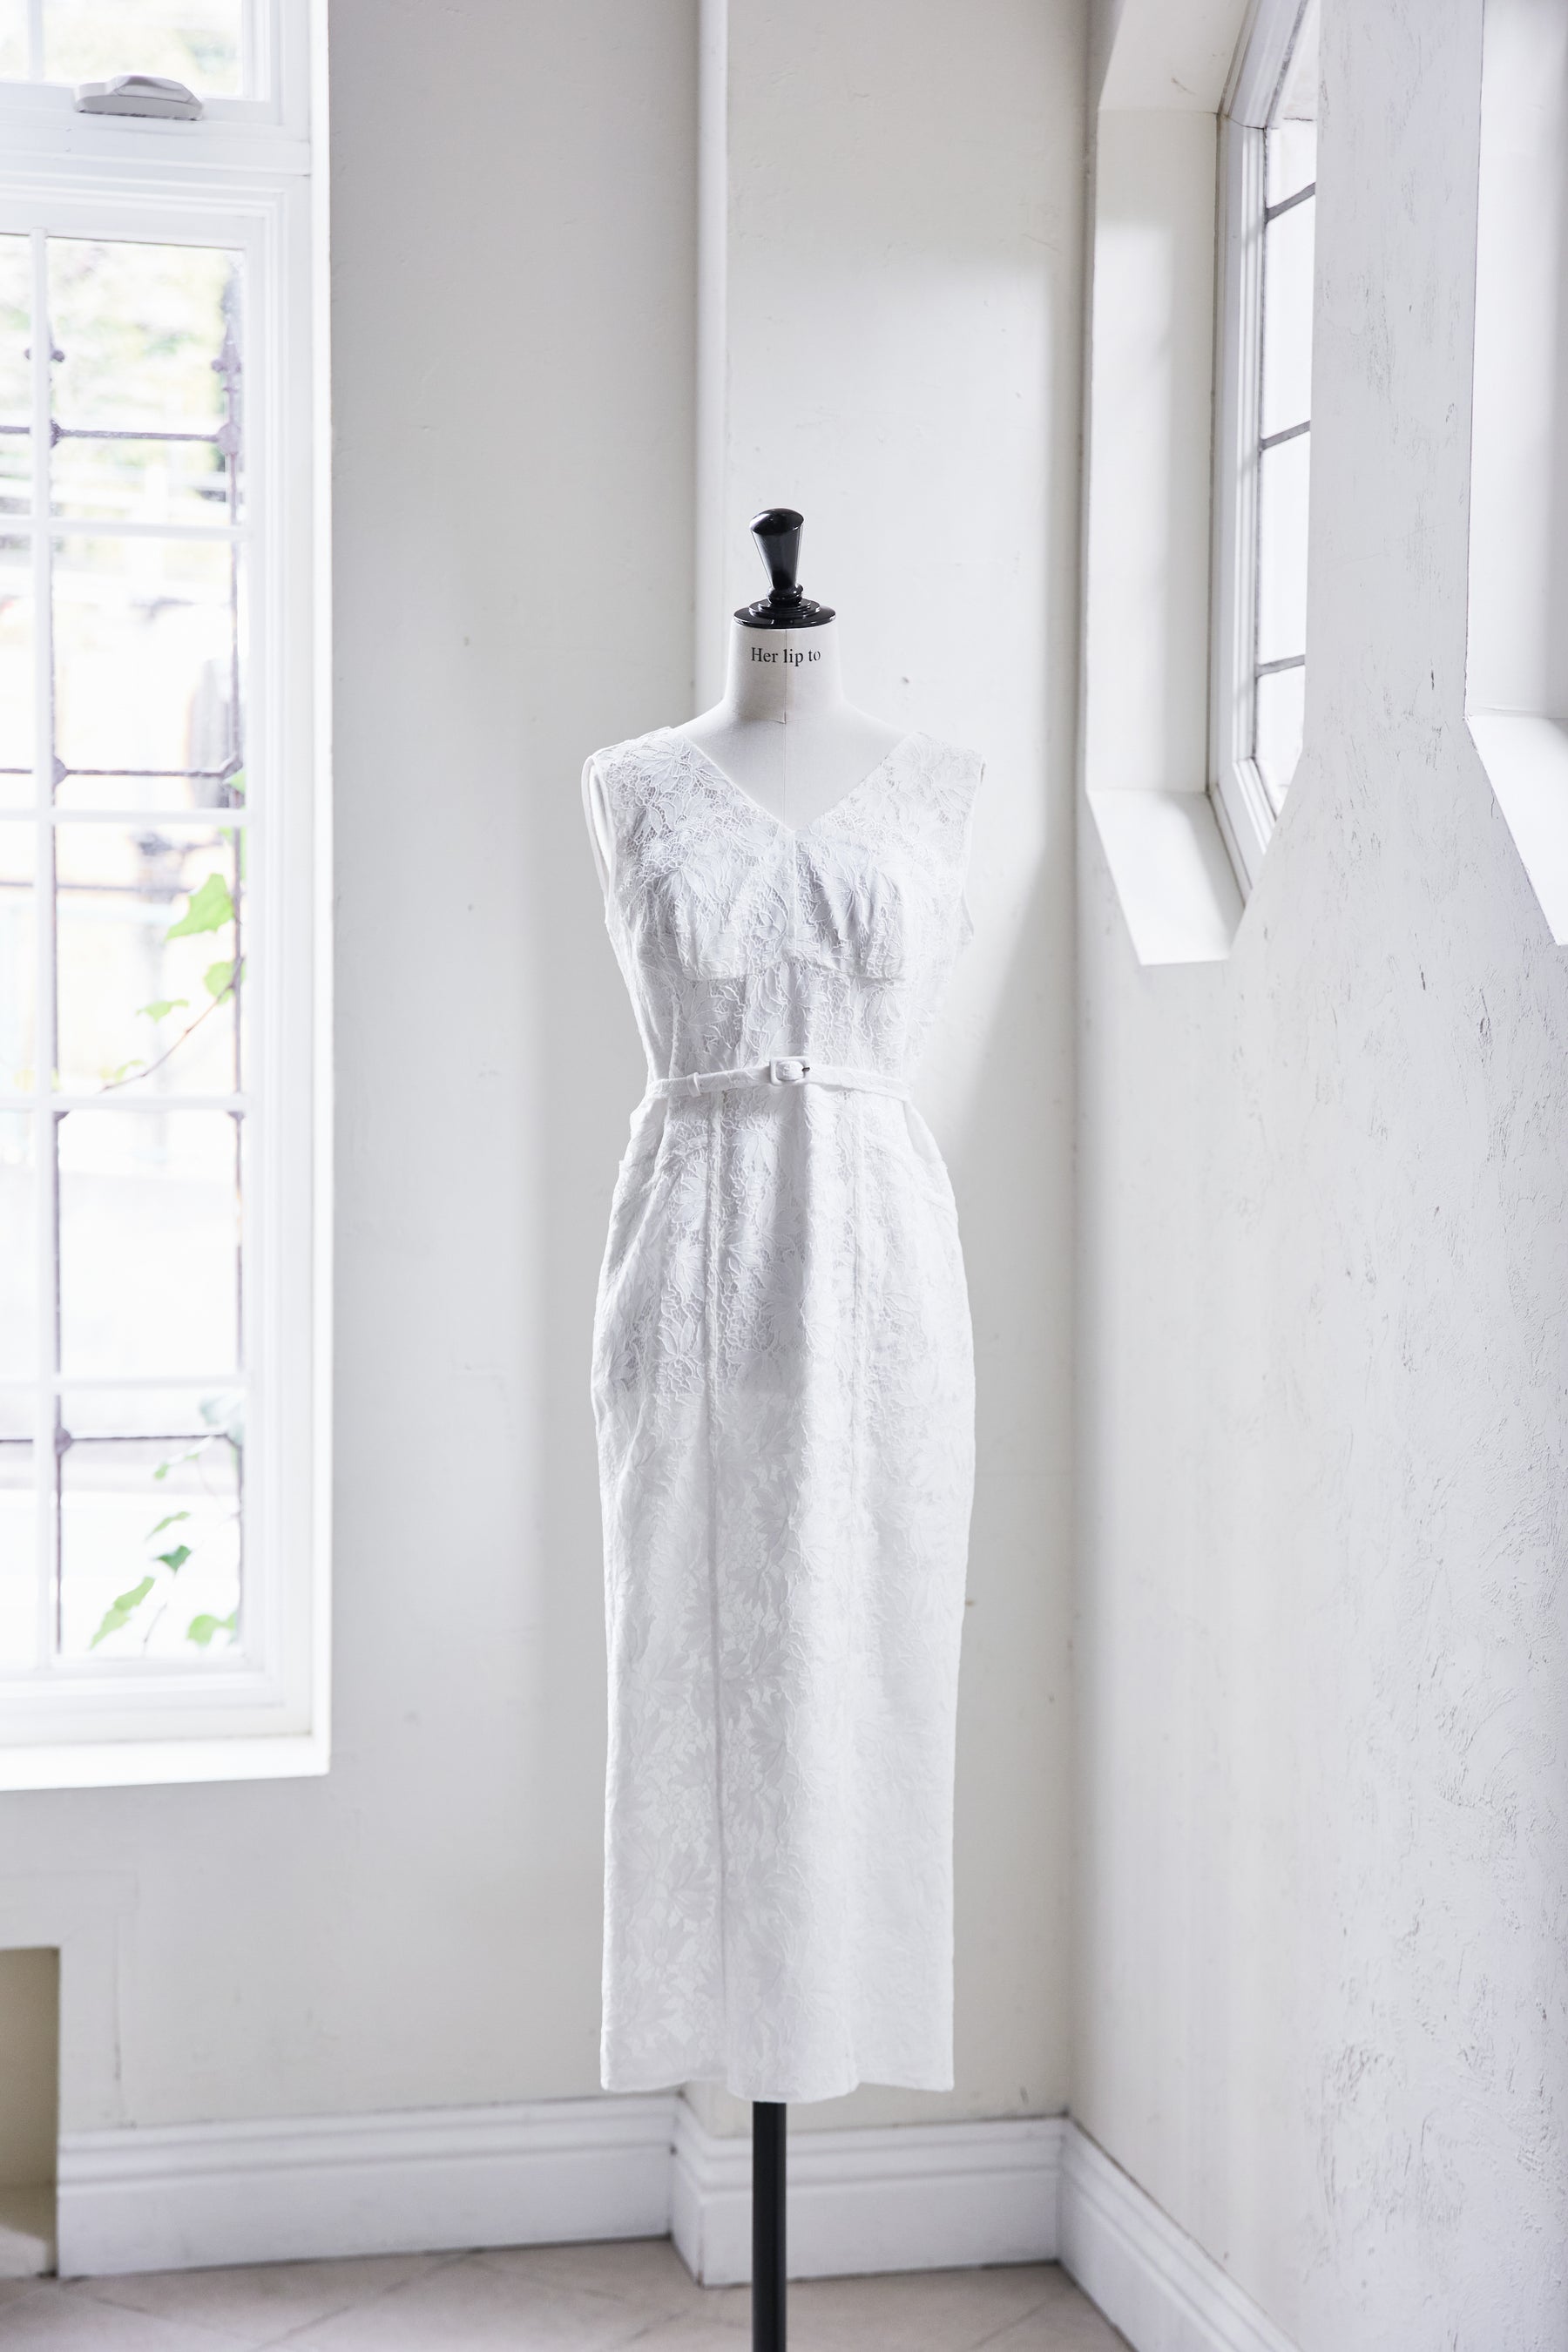 [pure white] Waltz Floral Lace Belted Dress